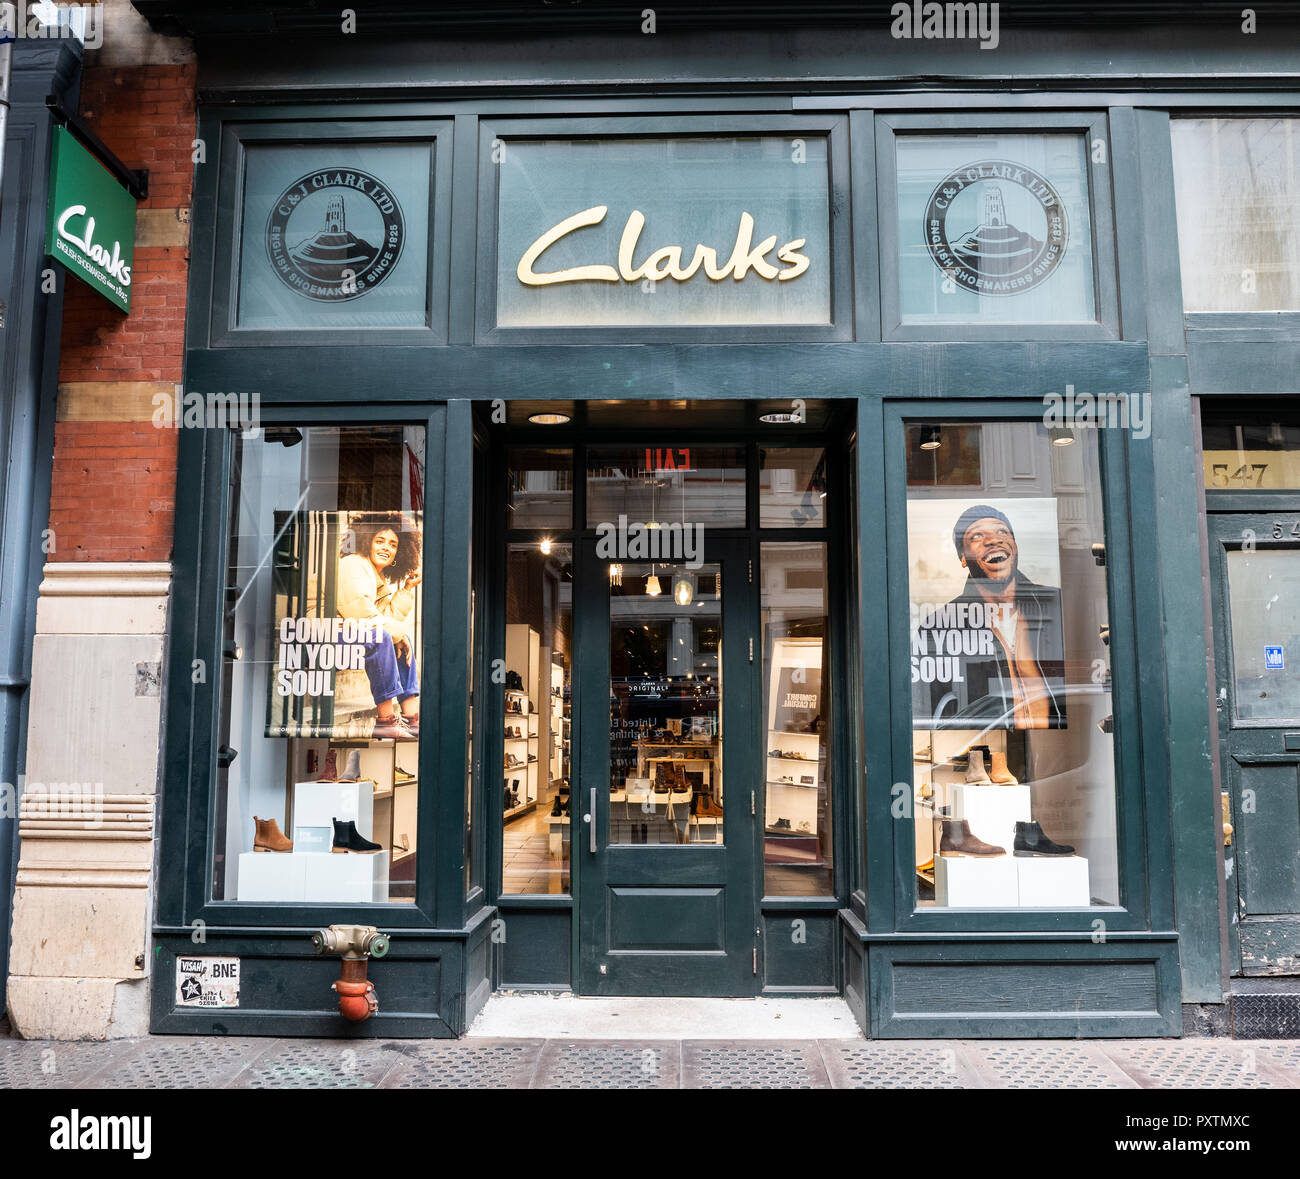 clarks shoe store nyc